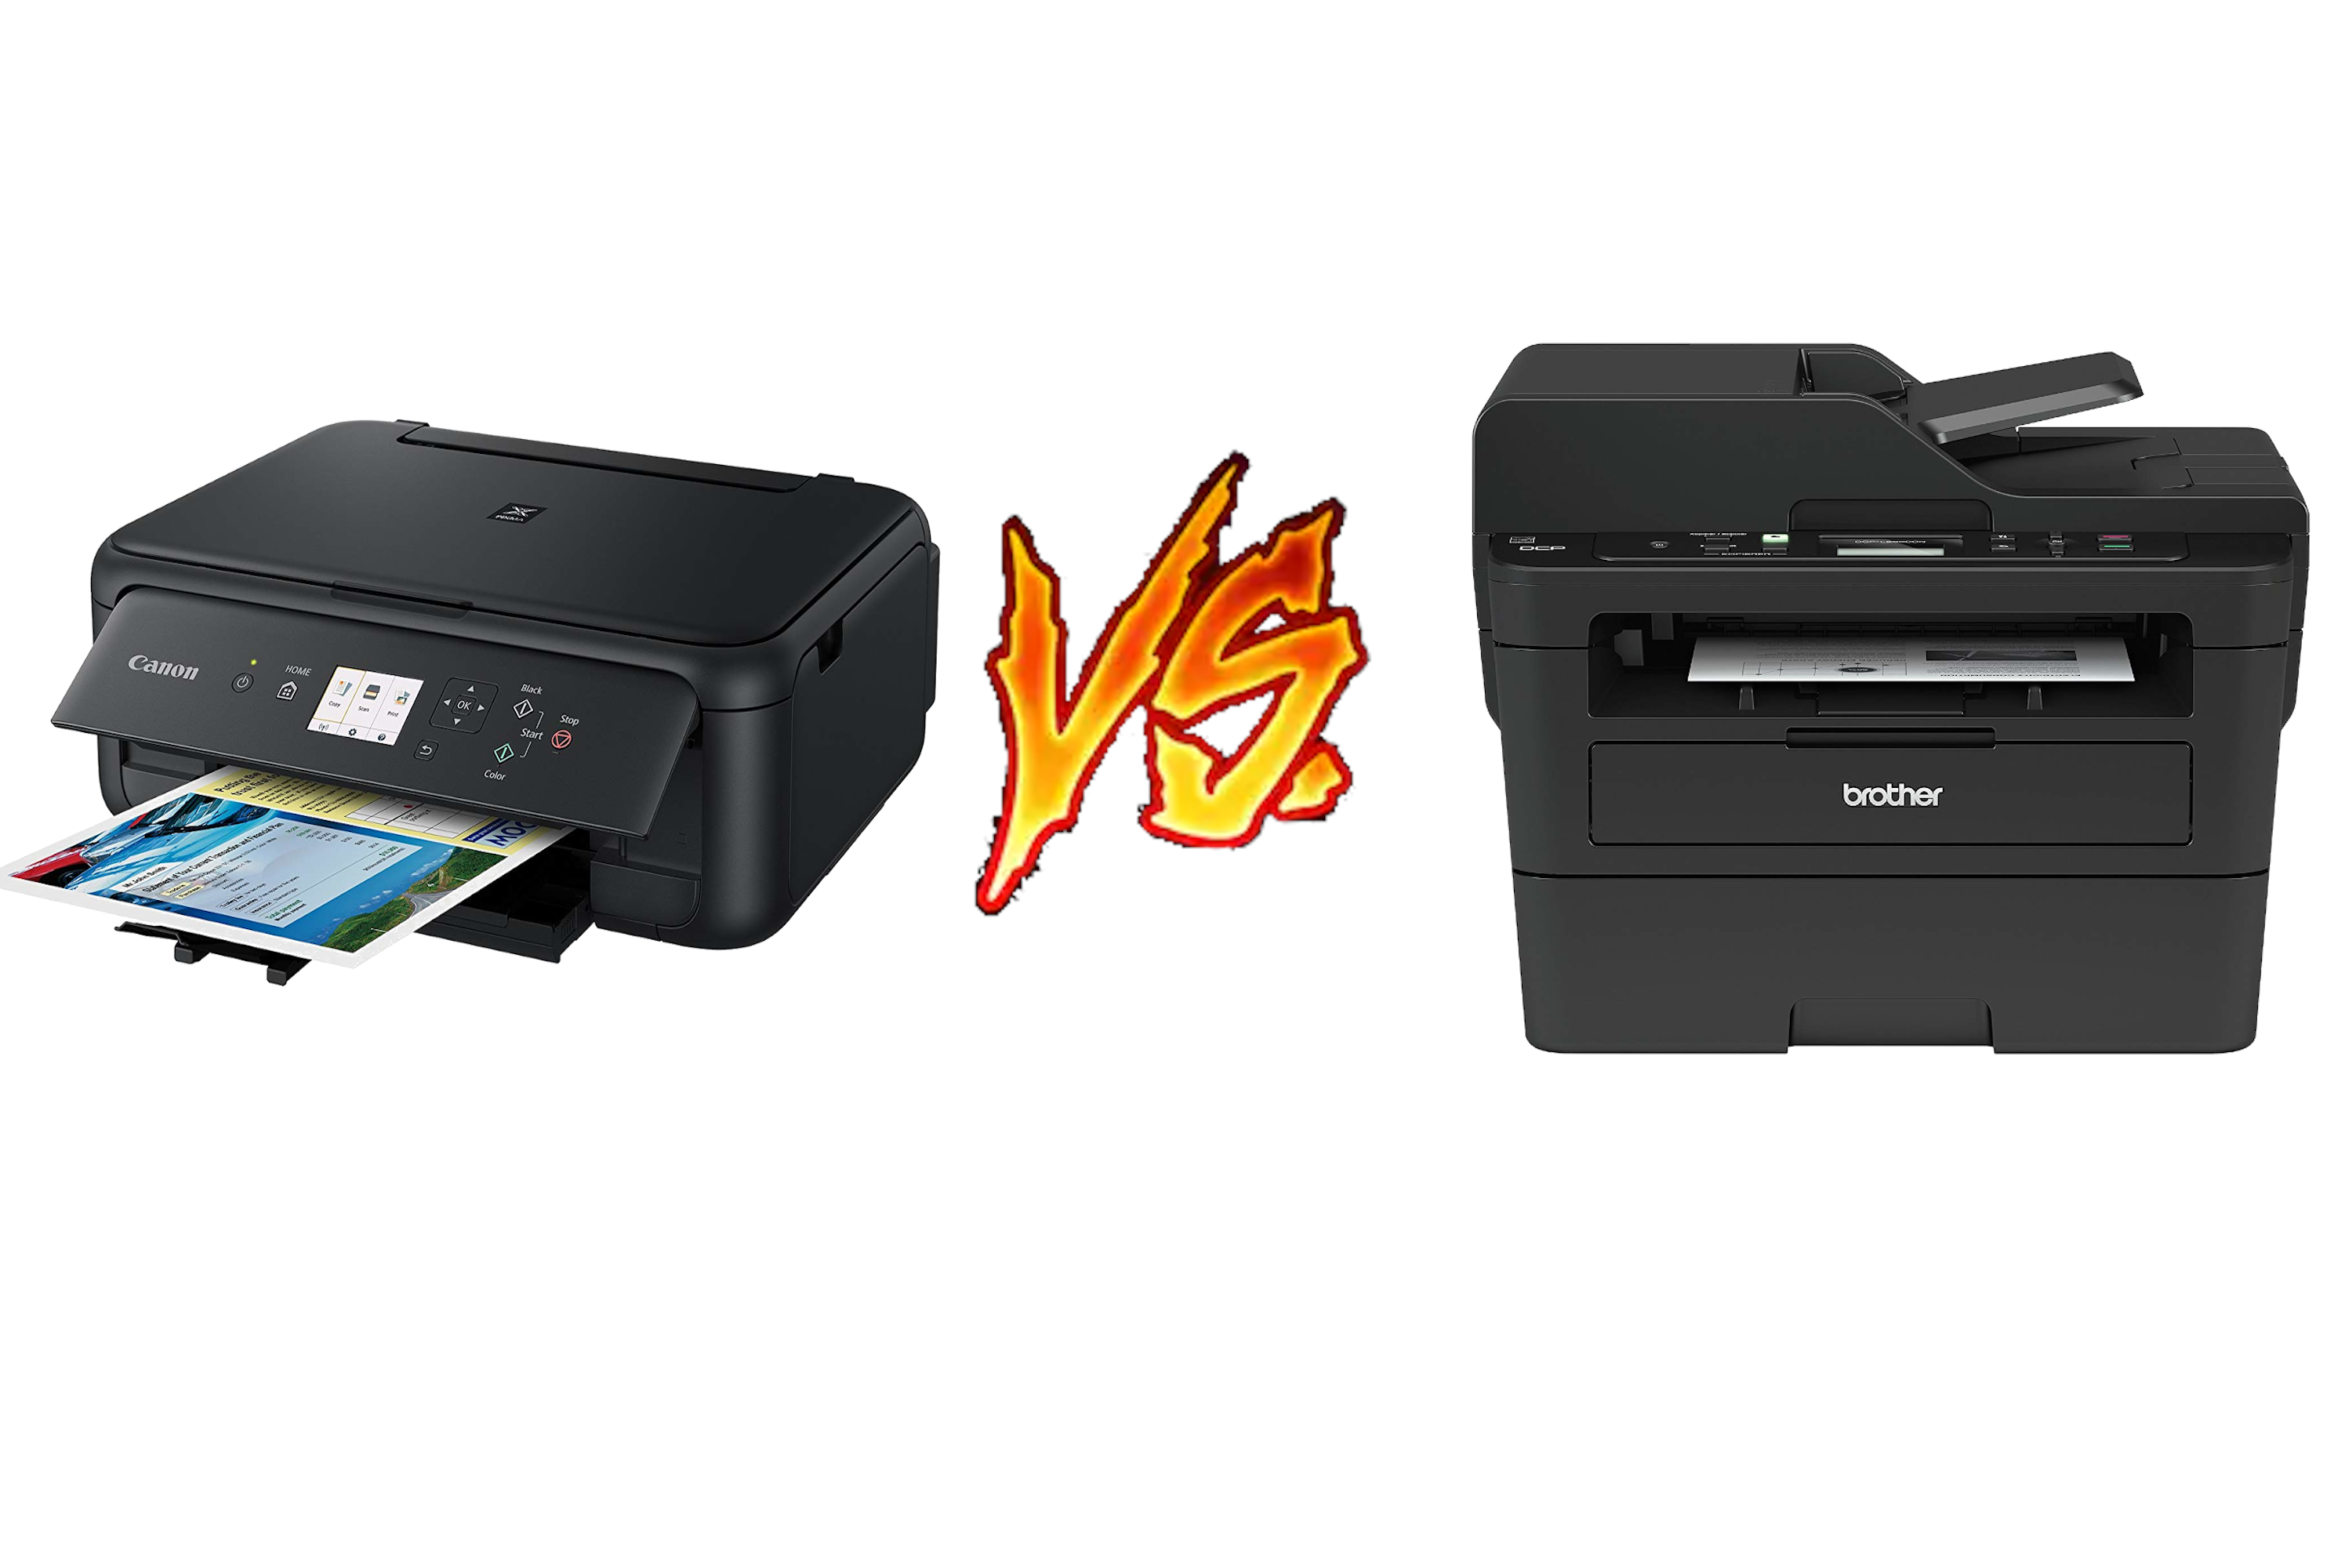 Bangladesh Lave om dominere Home office guide: Inkjet vs Laser - which printer do you need? -  NotebookCheck.net News